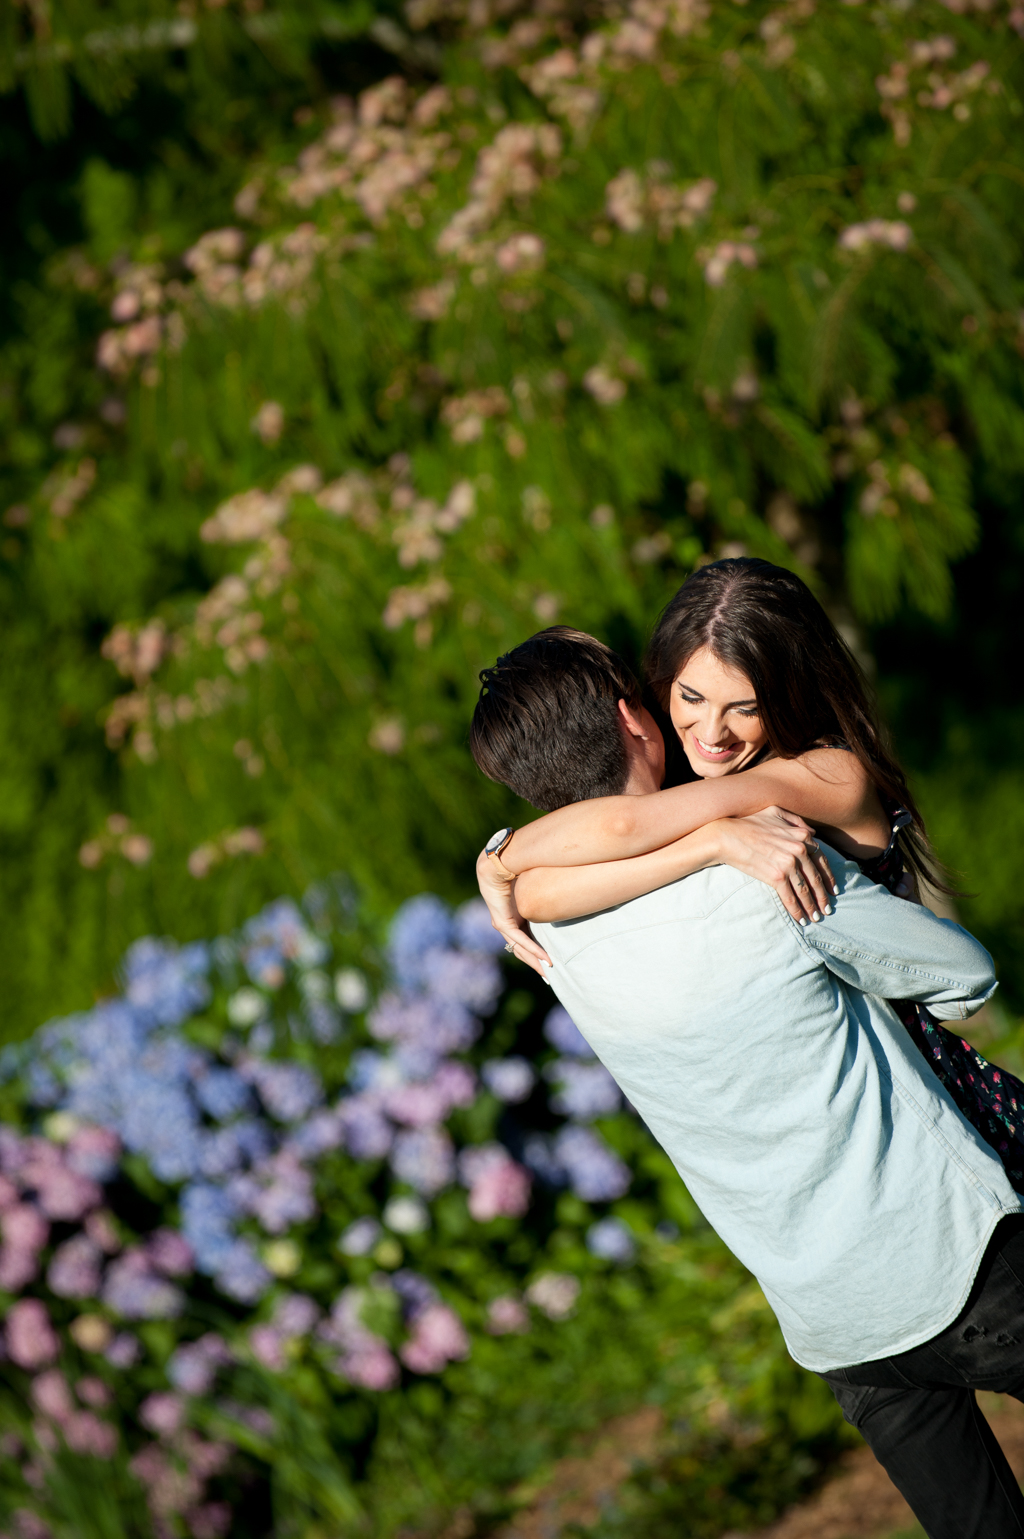 a man picks up a girl and swings her around in front of purple hydrangeas and a mimosa tree